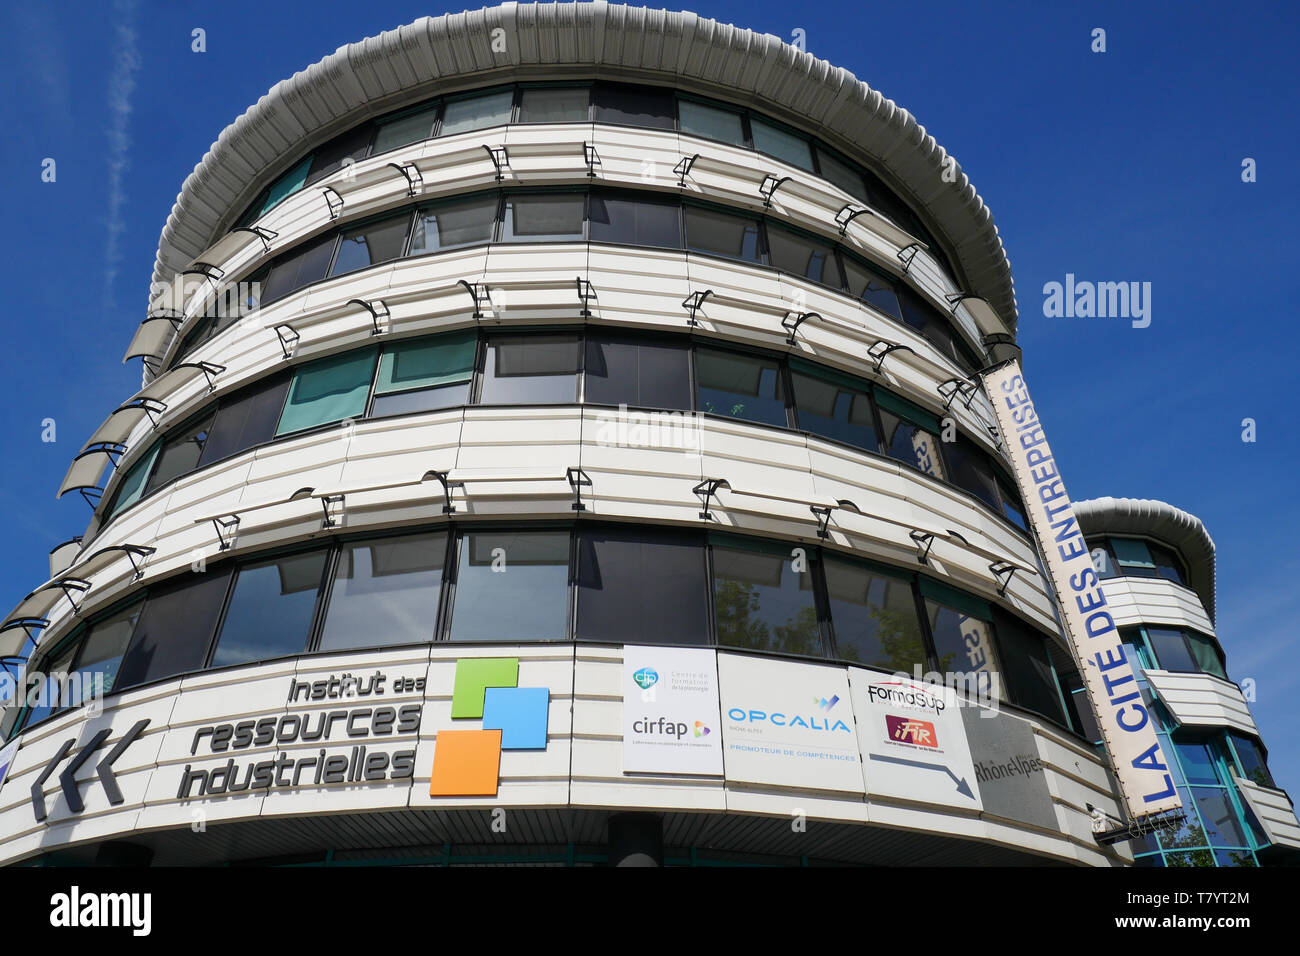 IRI, Industrial Resources Institute, Lyon, France Stock Photo